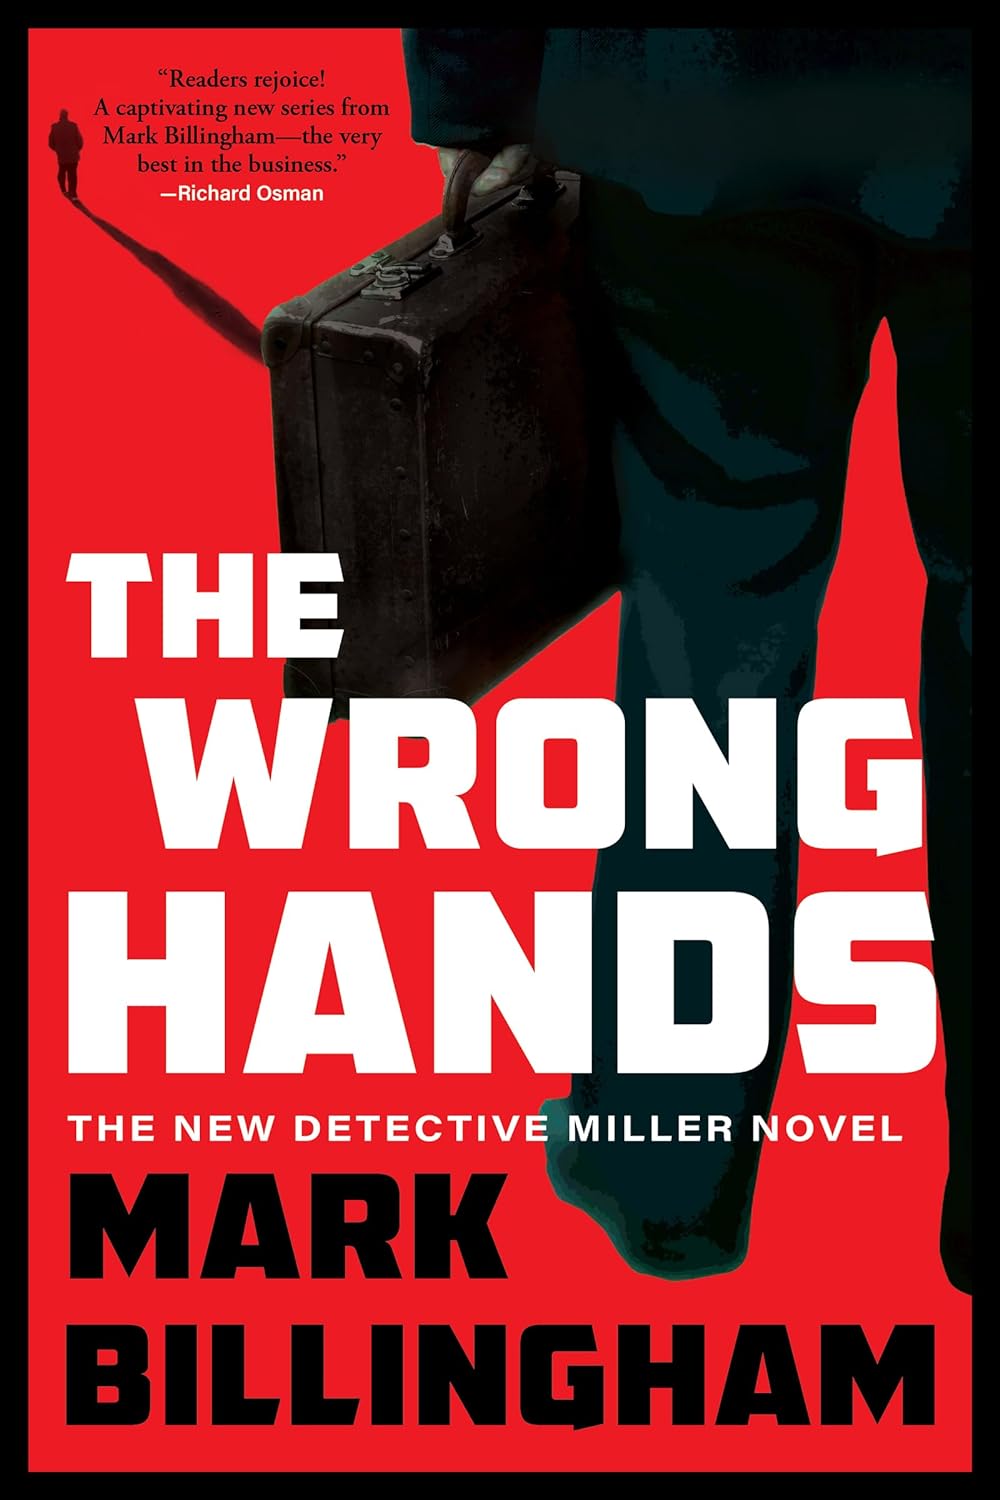 Image for "The Wrong Hands"